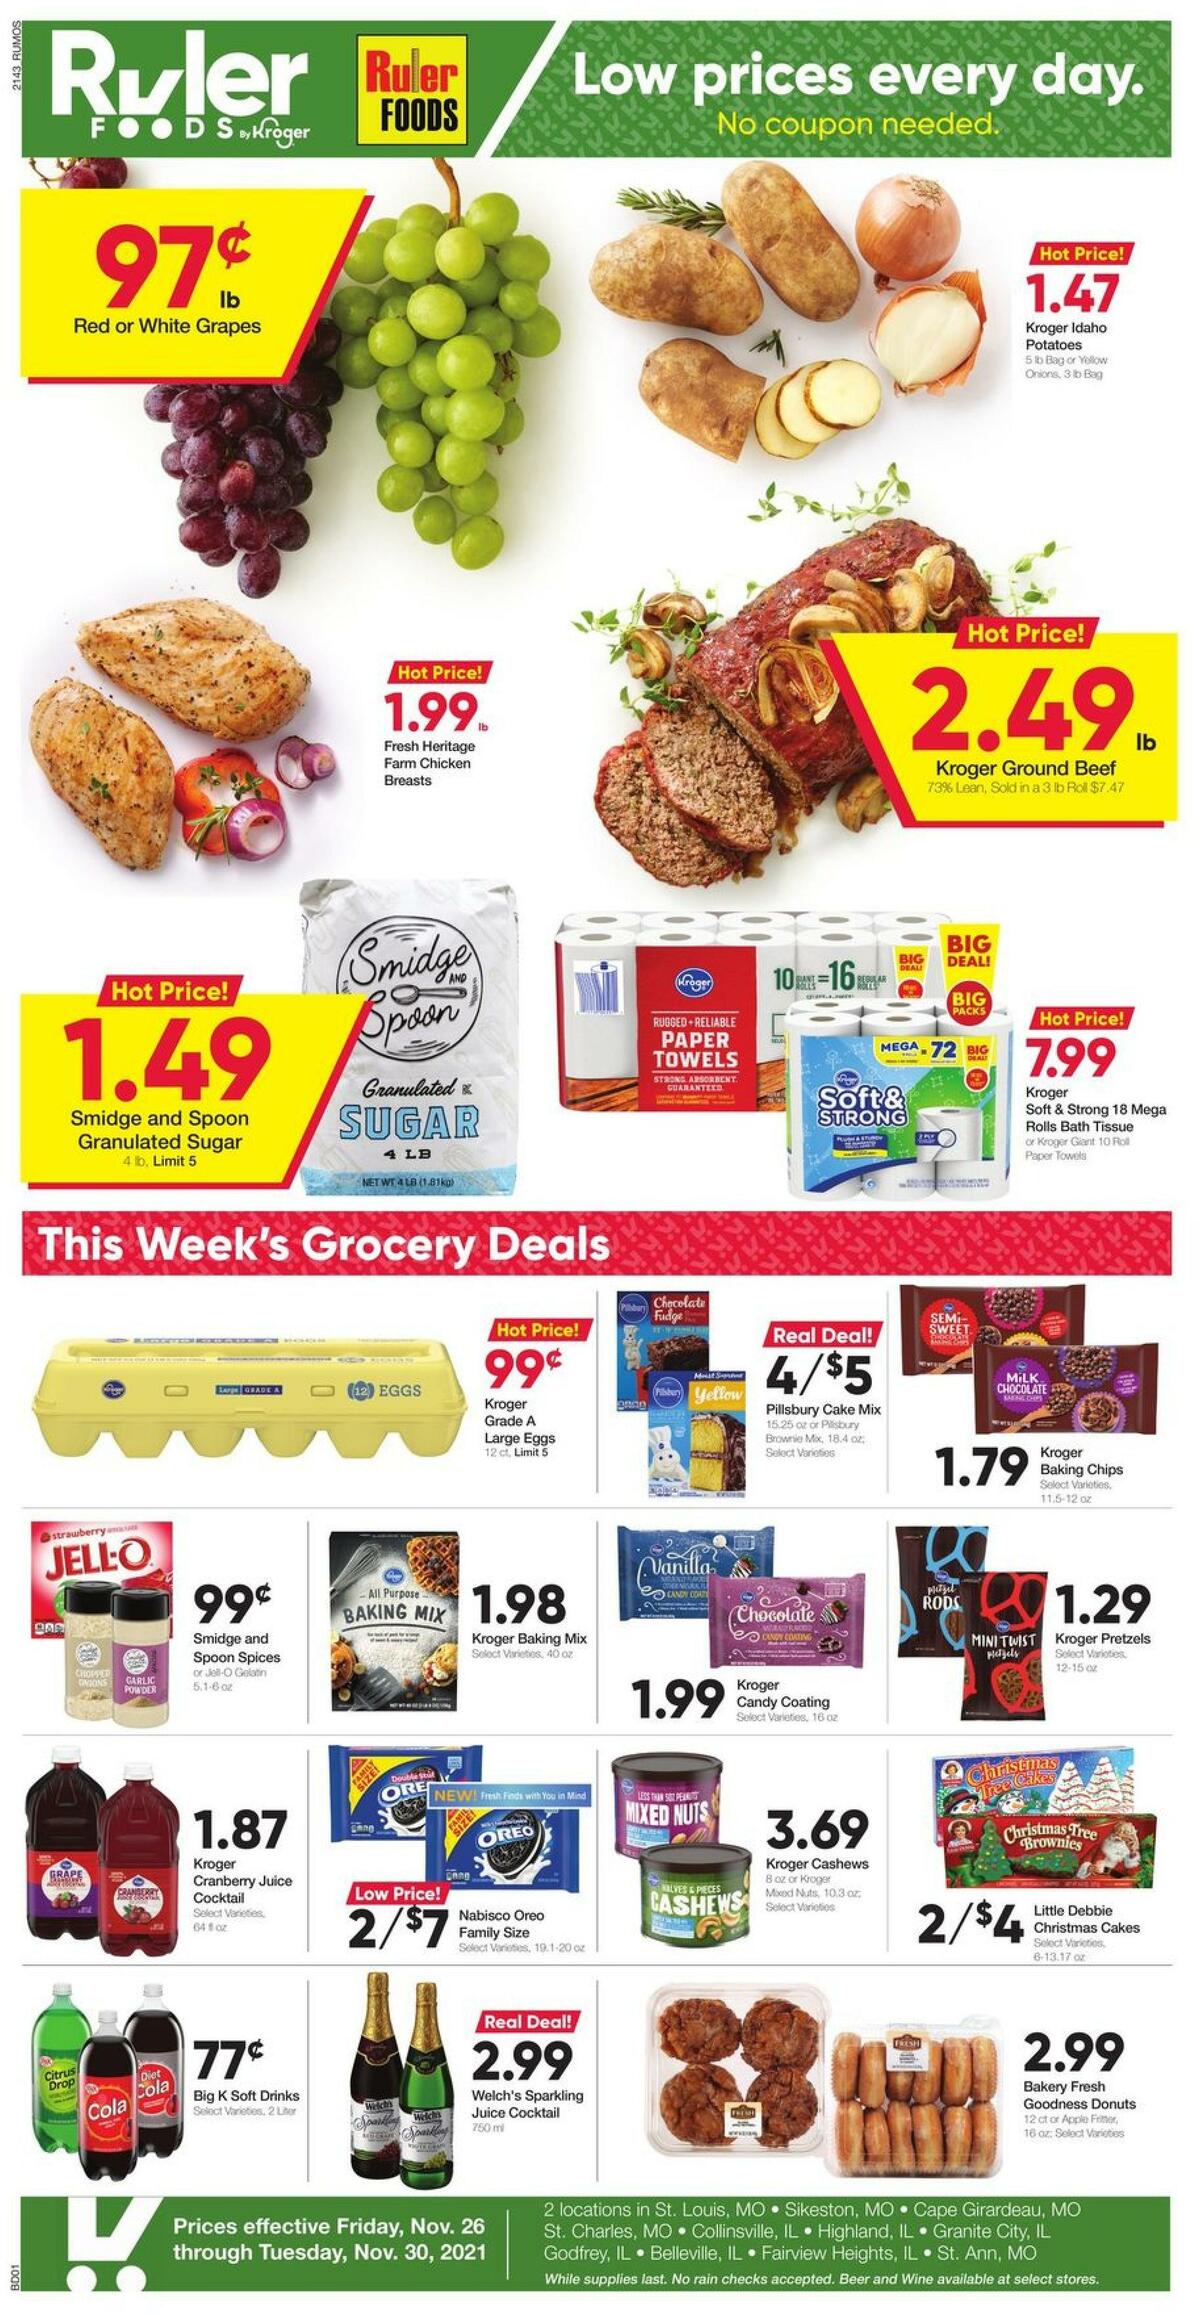 Ruler Foods Weekly Ad from November 26